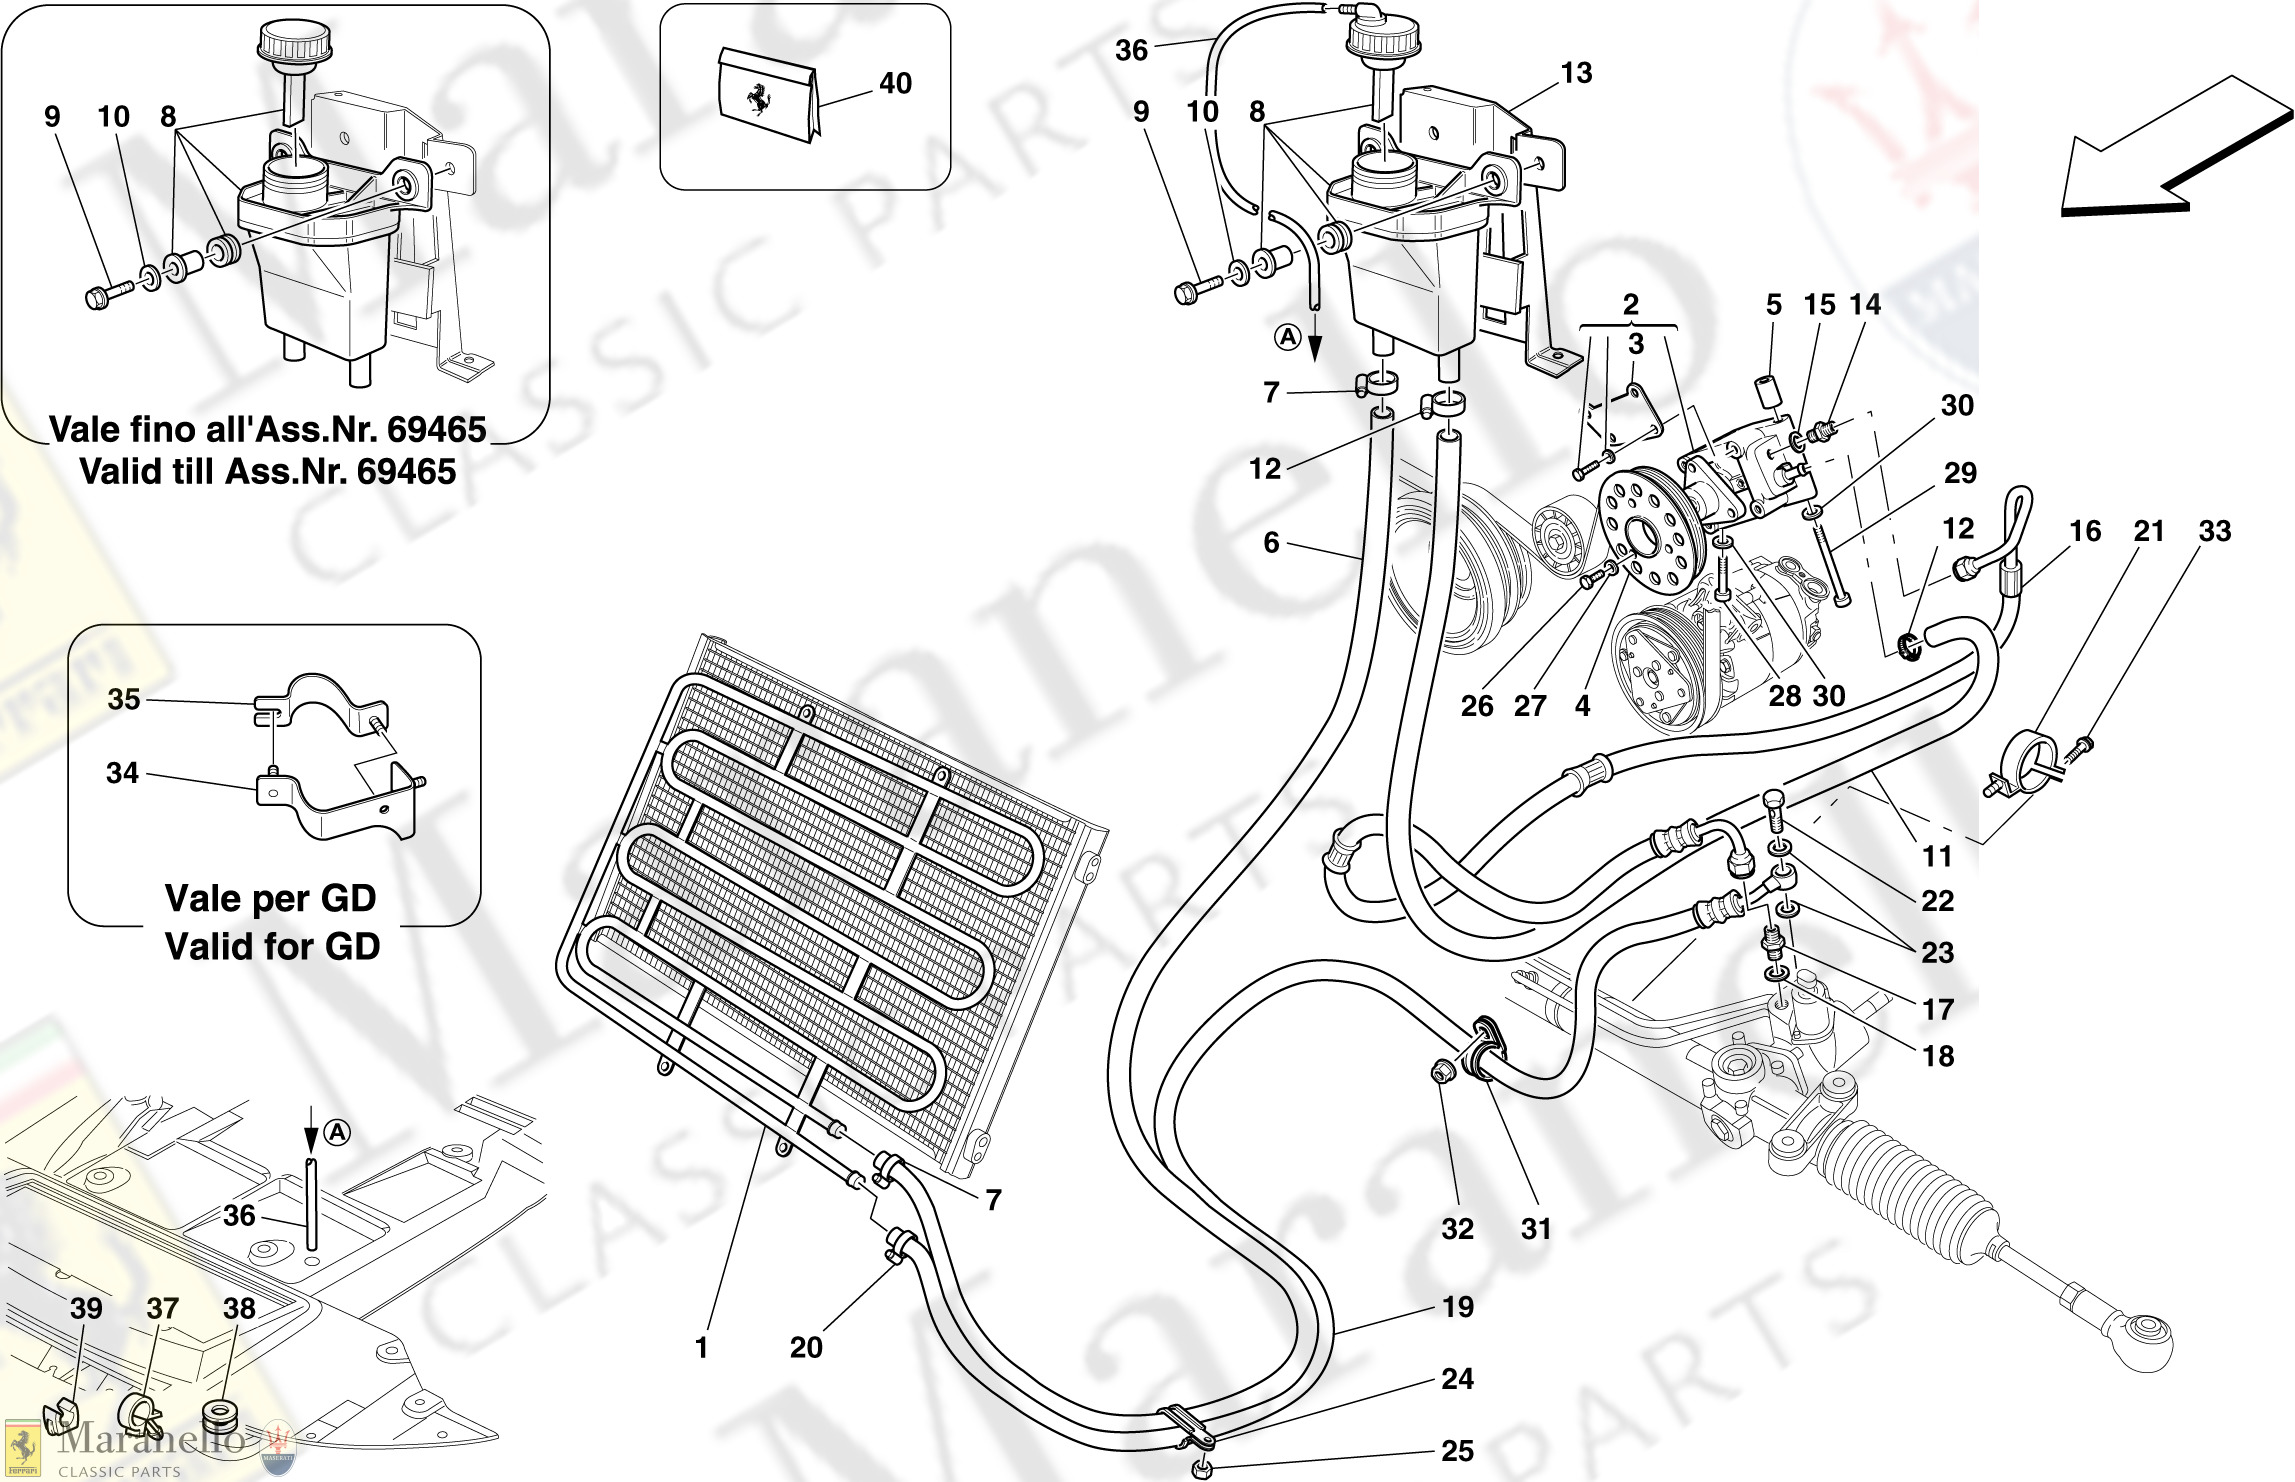 045 - Hydraulic Fluid Reservoir, Pump And Coil For Power Steering System